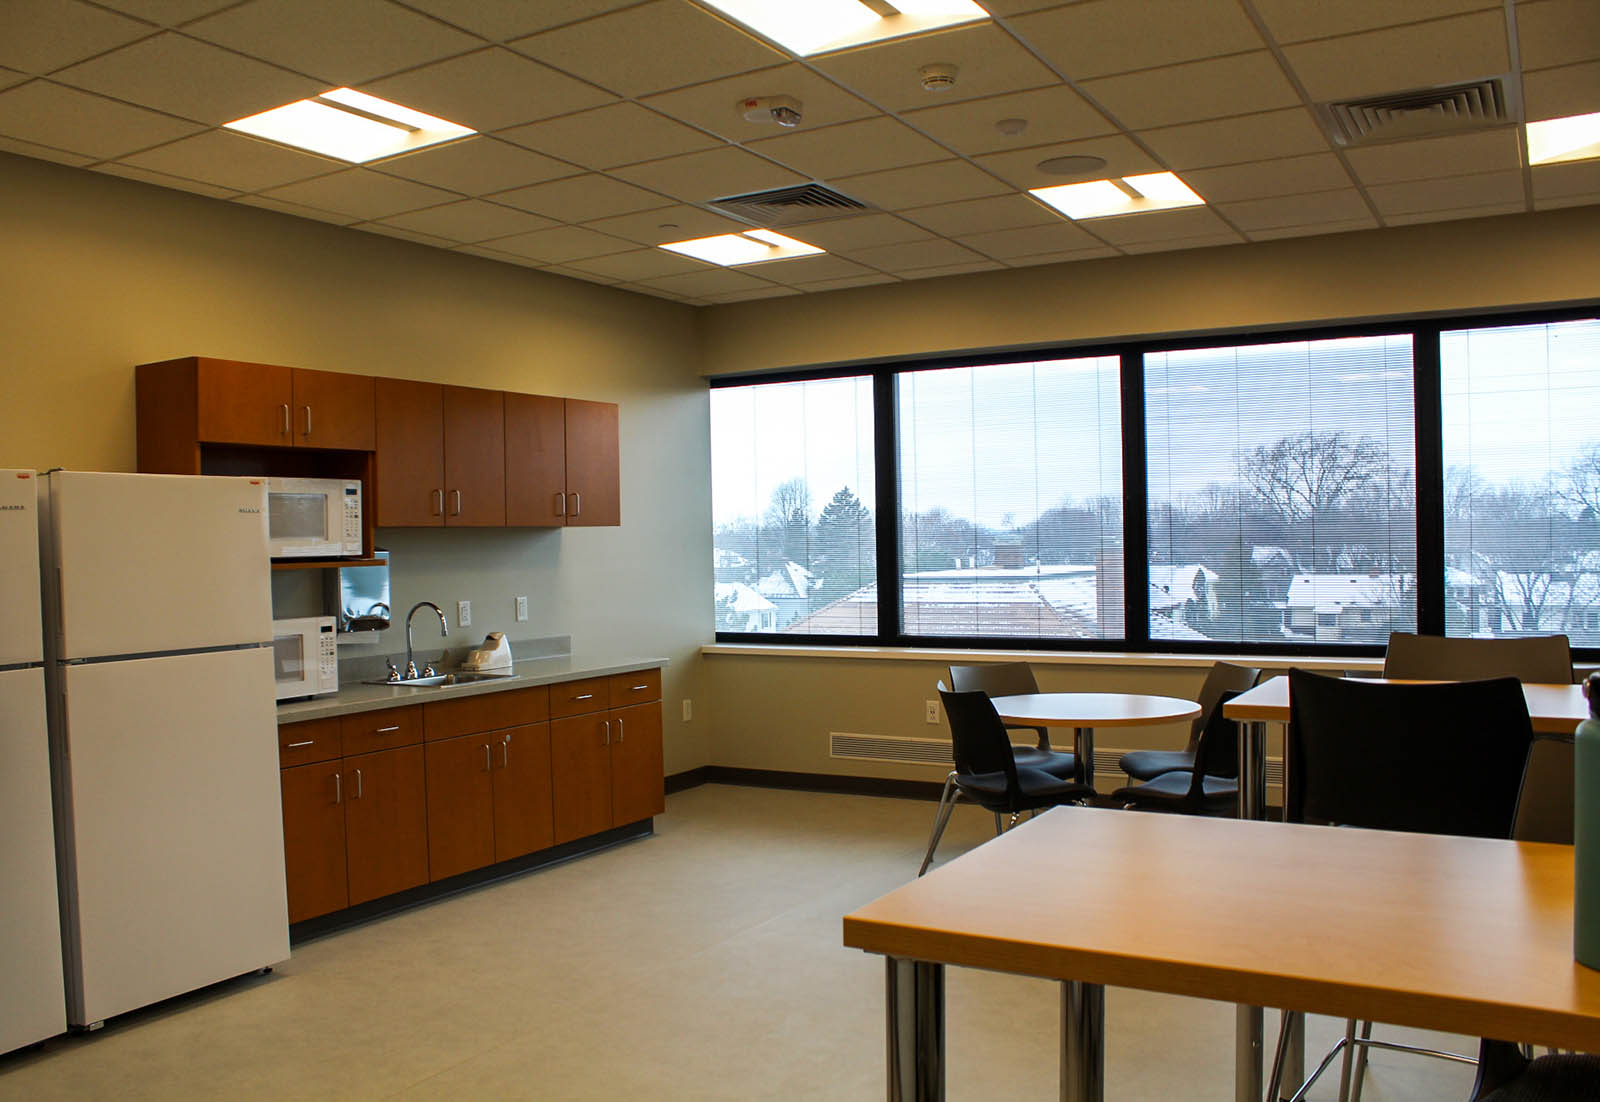 A breakroom with kitchen at Bellin Hospital